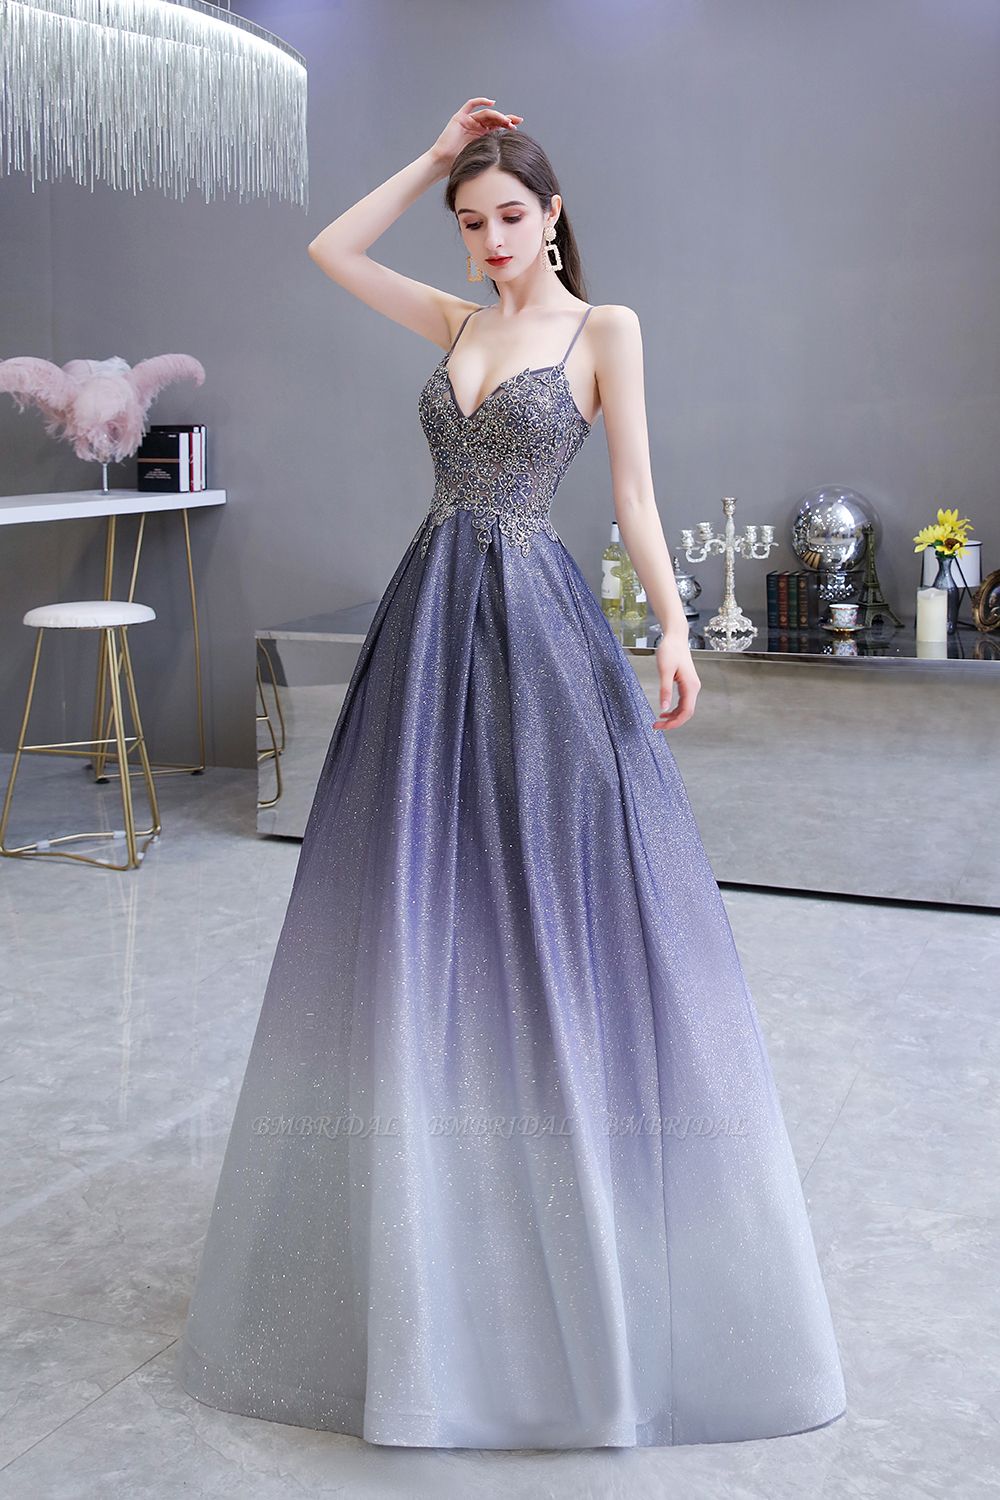 BMbridal Elegant Spaghetti Straps Ombre Prom Dress Long With Appliques Beads